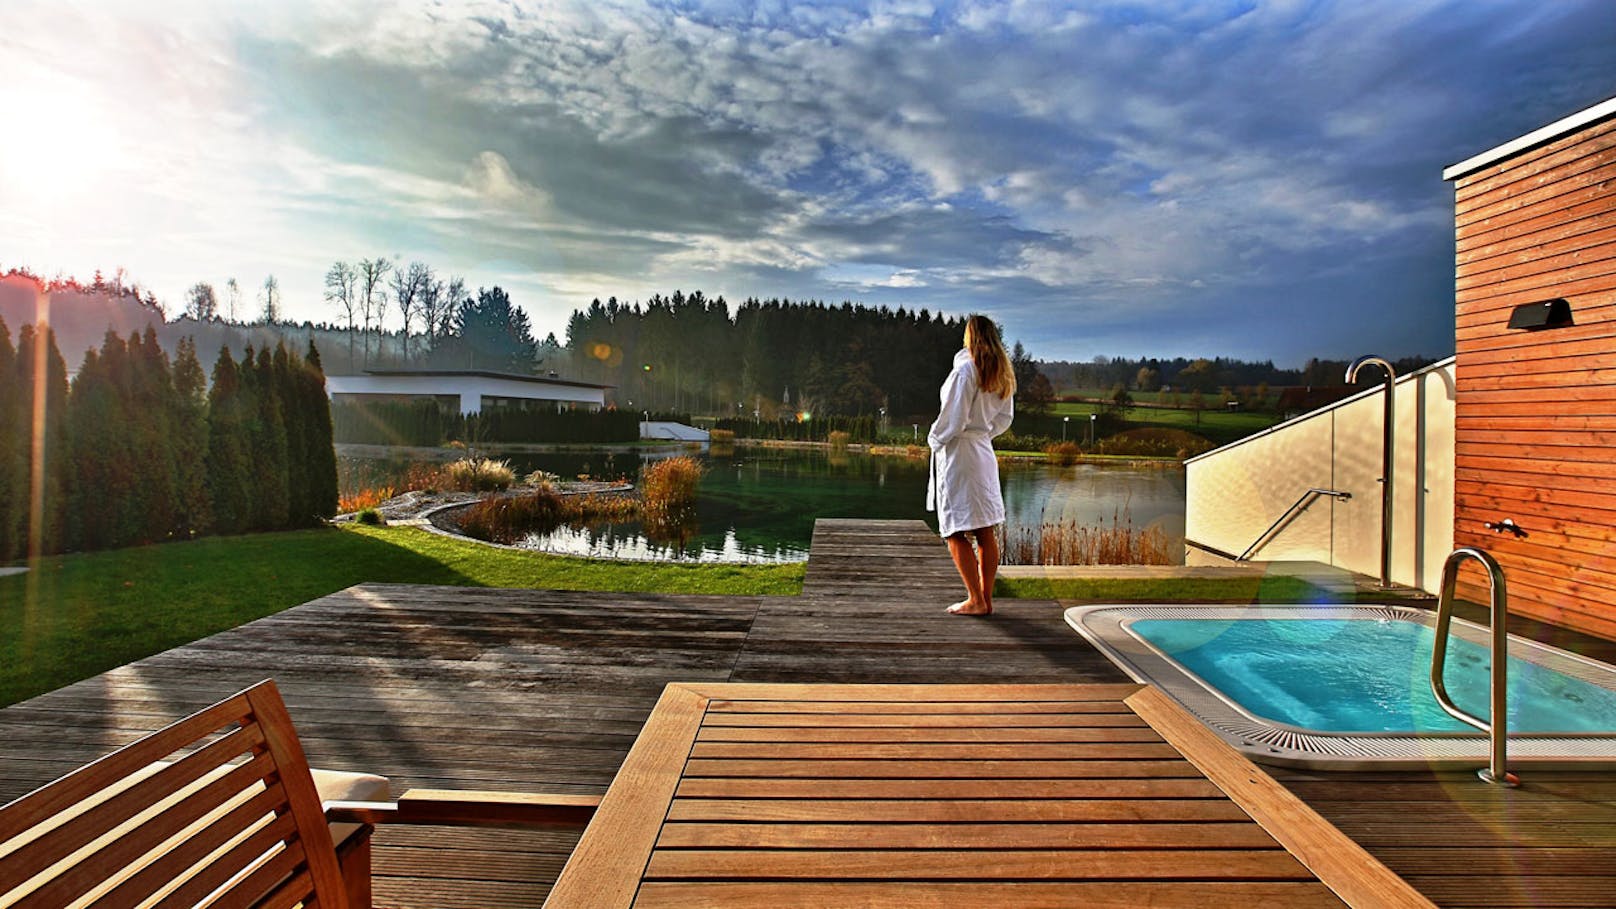 <strong>Geinberg5 Private Spa Villas:&nbsp;</strong>19 Punkte, 4 Lilien <a href="https://www.relax-guide.com/geinberg5-private-spa-villas">https://www.relax-guide.com/geinberg5-private-spa-villas</a>